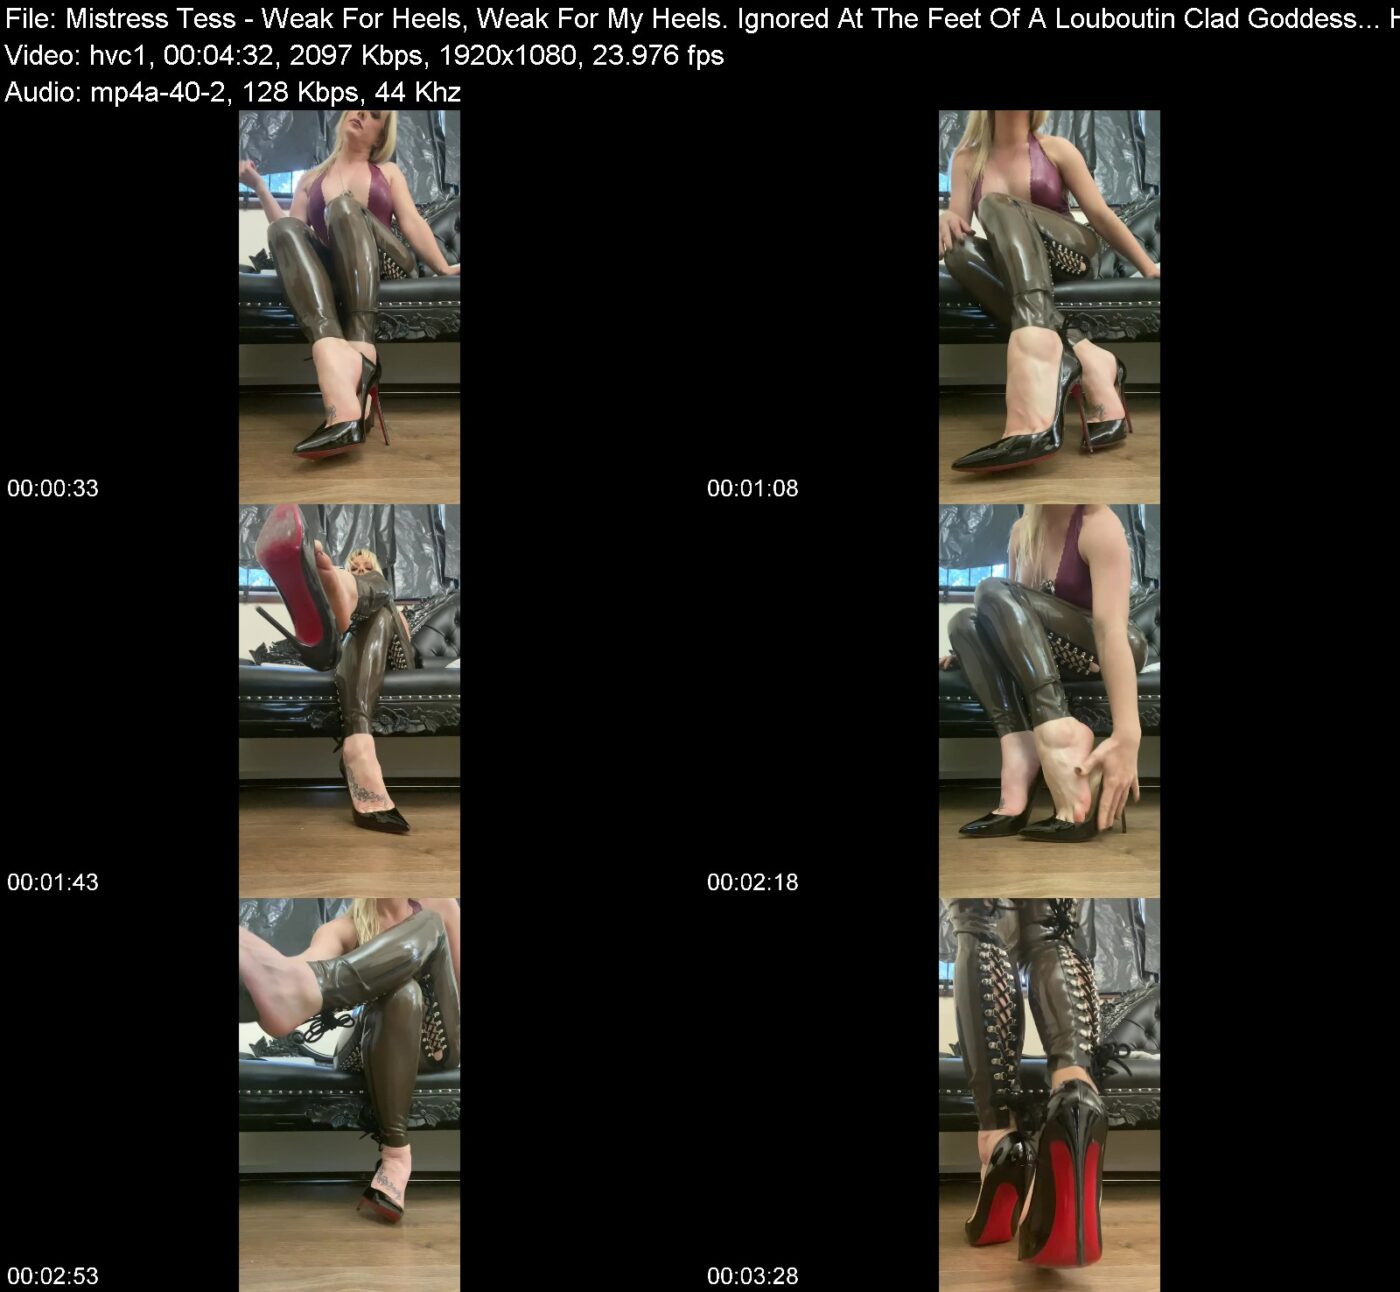 Mistress Tess - Weak For Heels, Weak For My Heels. Ignored At The Feet Of A Louboutin Clad Goddess... Hypn